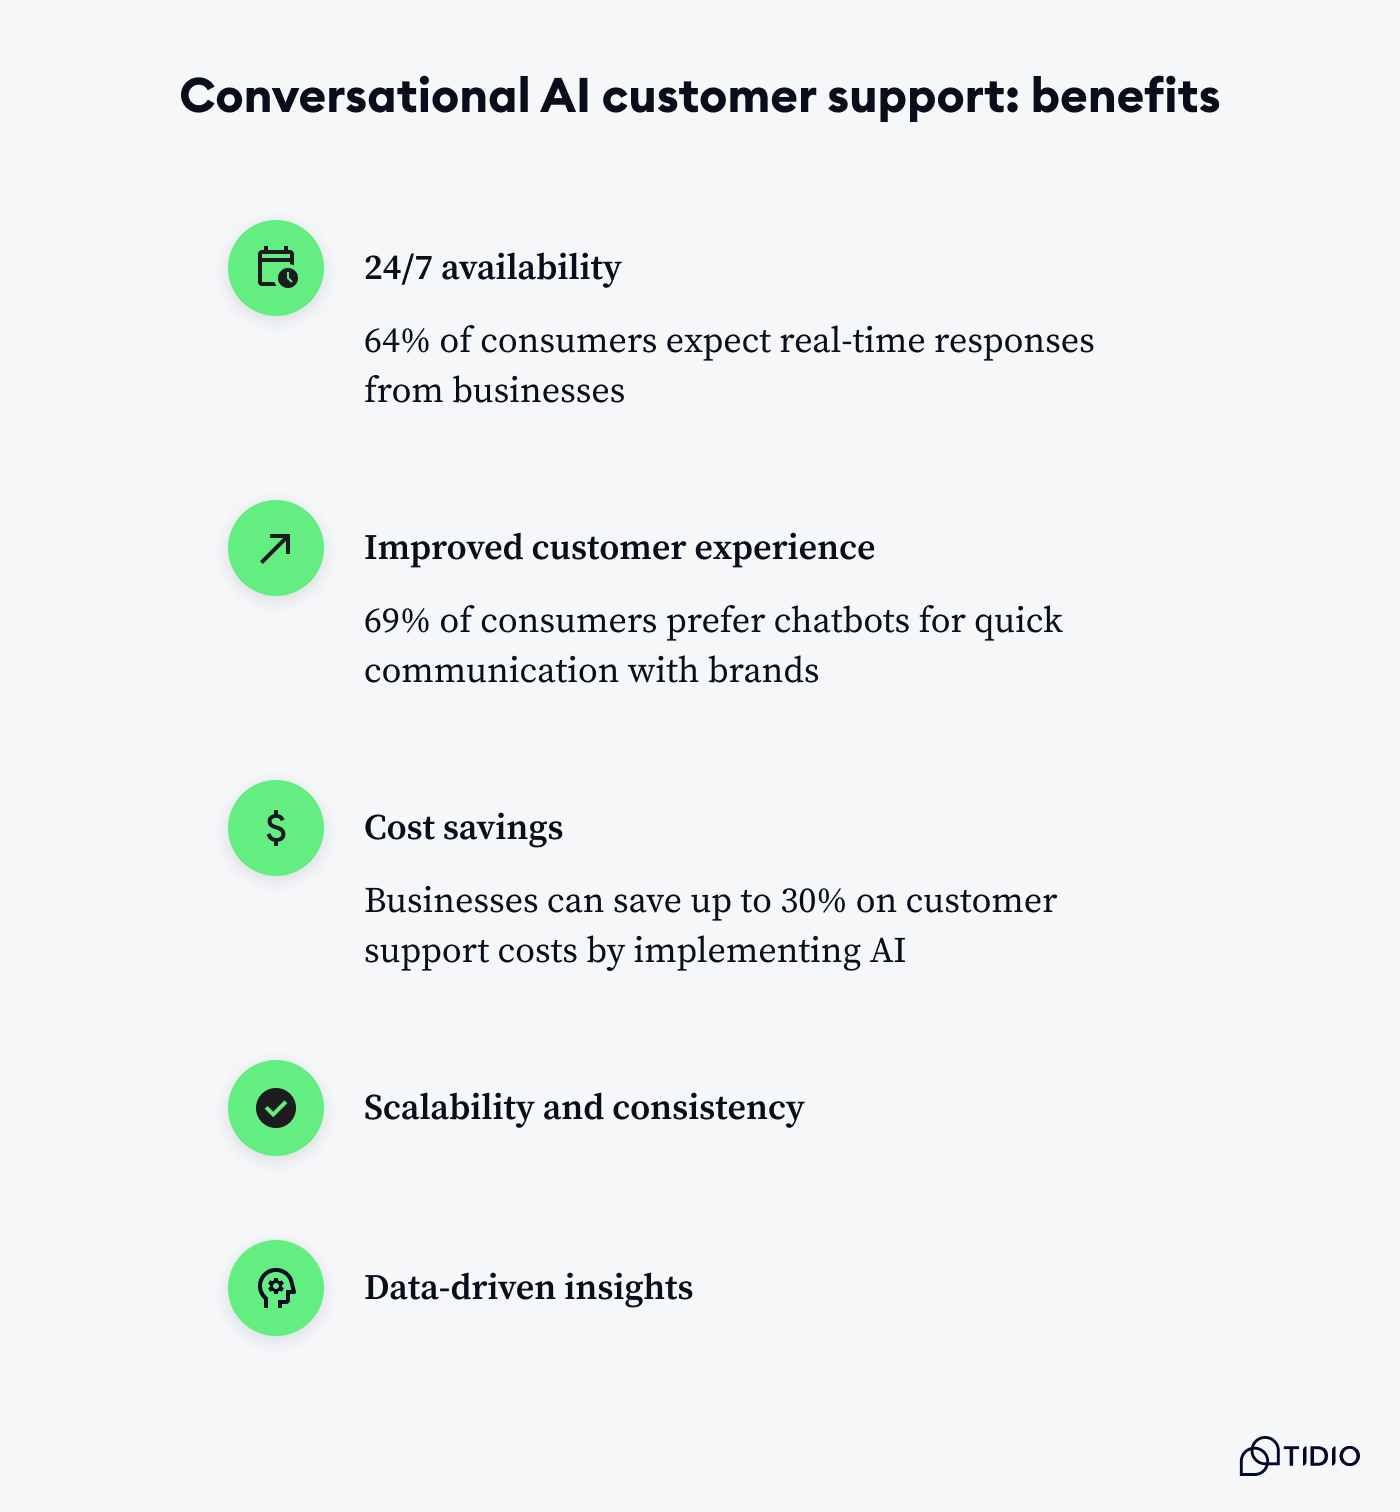 Benefits of conversational support on image